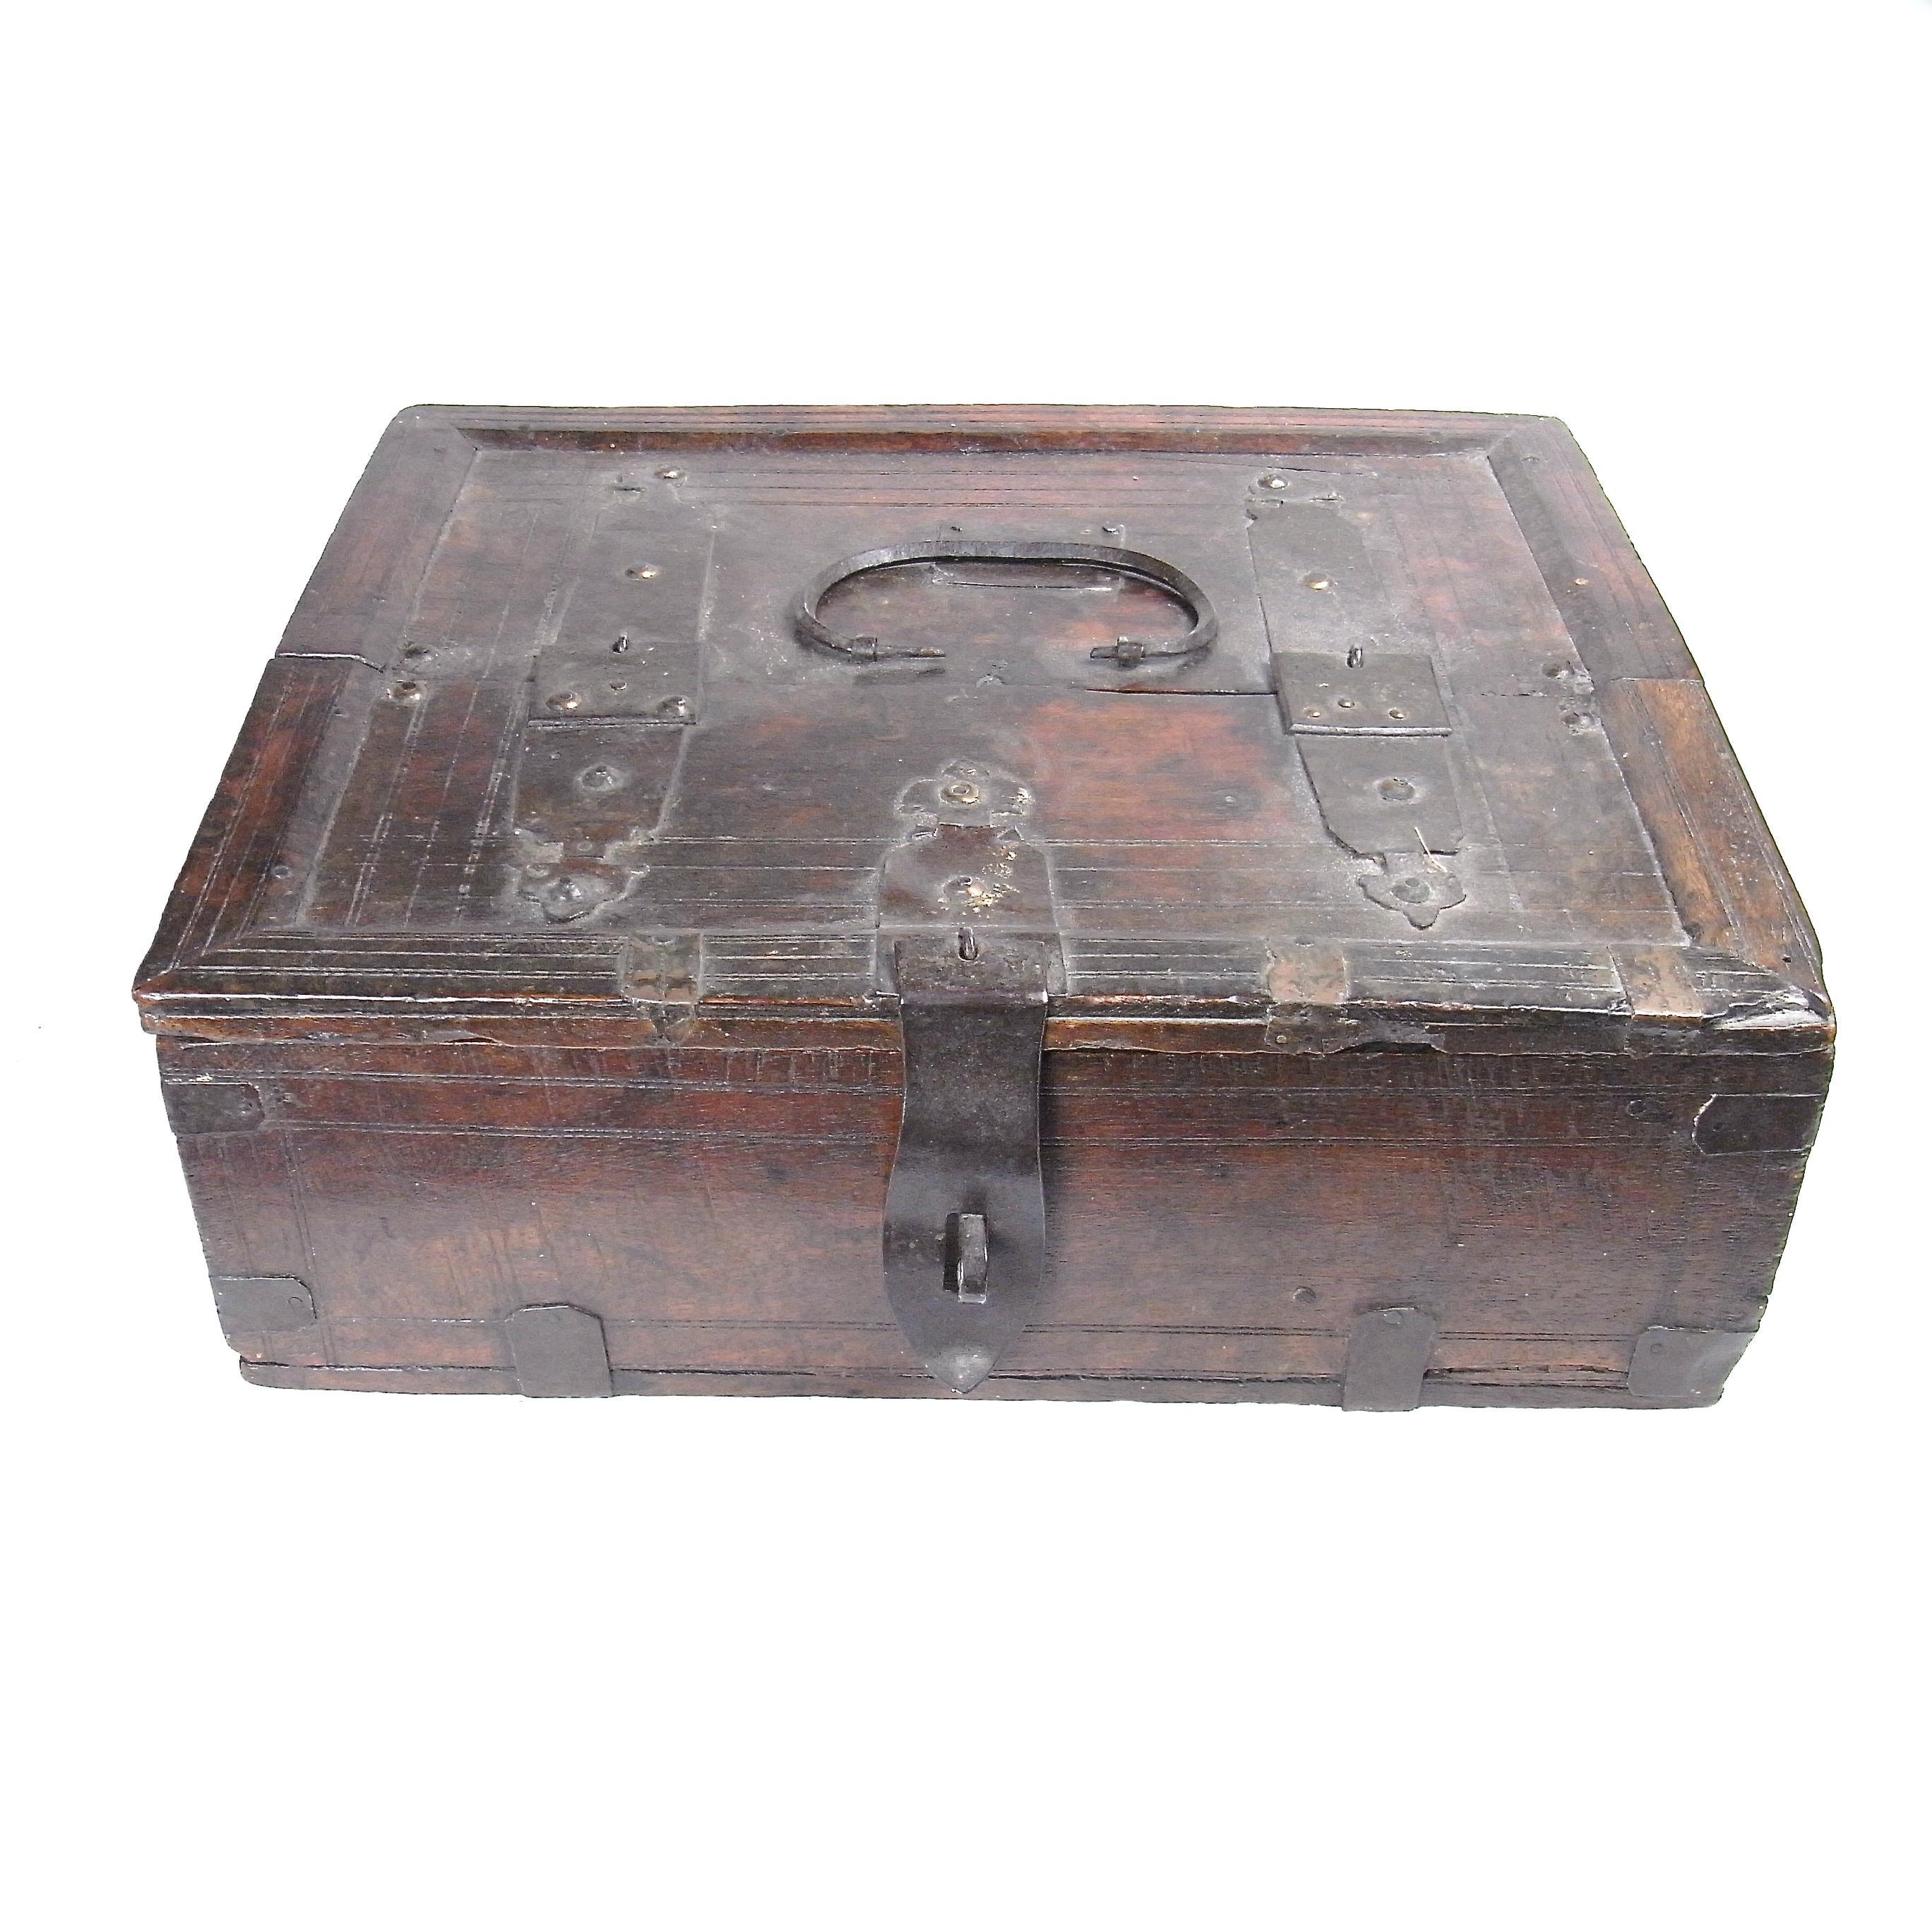 A reinforced oak and steel travelling merchants box, 18th/early 19th century